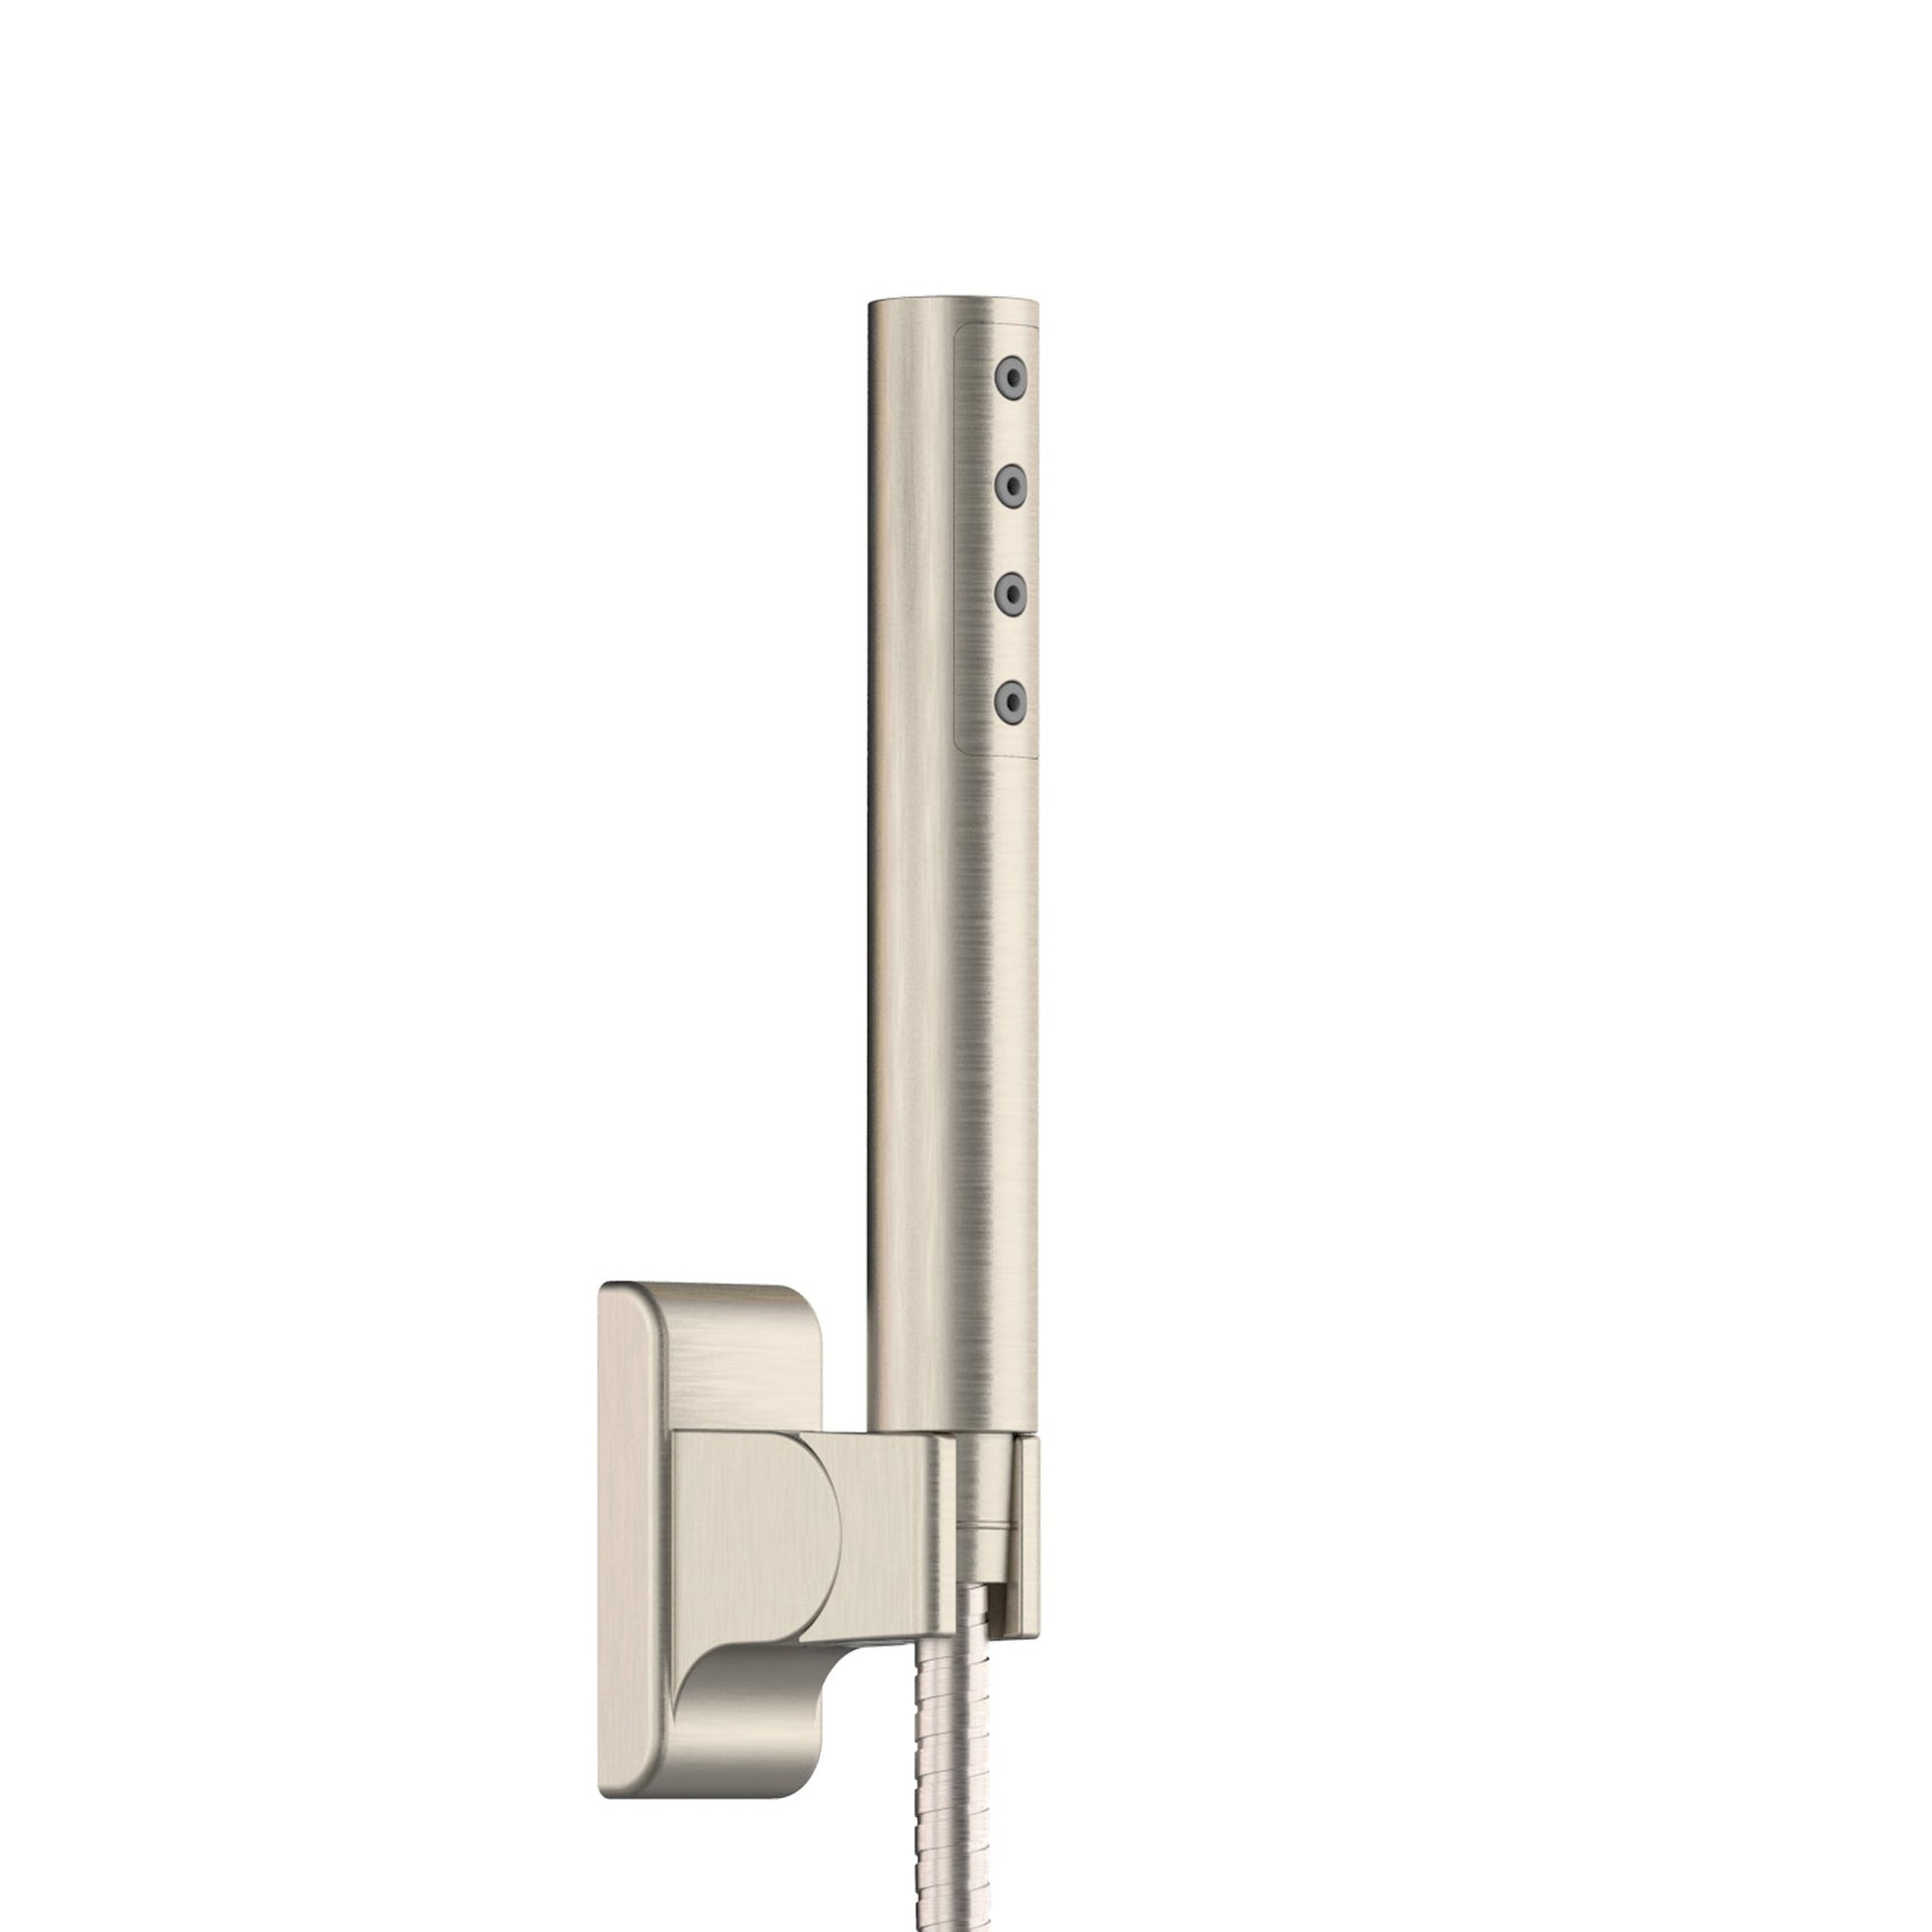 PULSE ShowerSpas Atlantis 2.5 GPM Rain Shower System in Brushed Nickel Finish With 5-Power Nozzle and Single Function Hand Shower